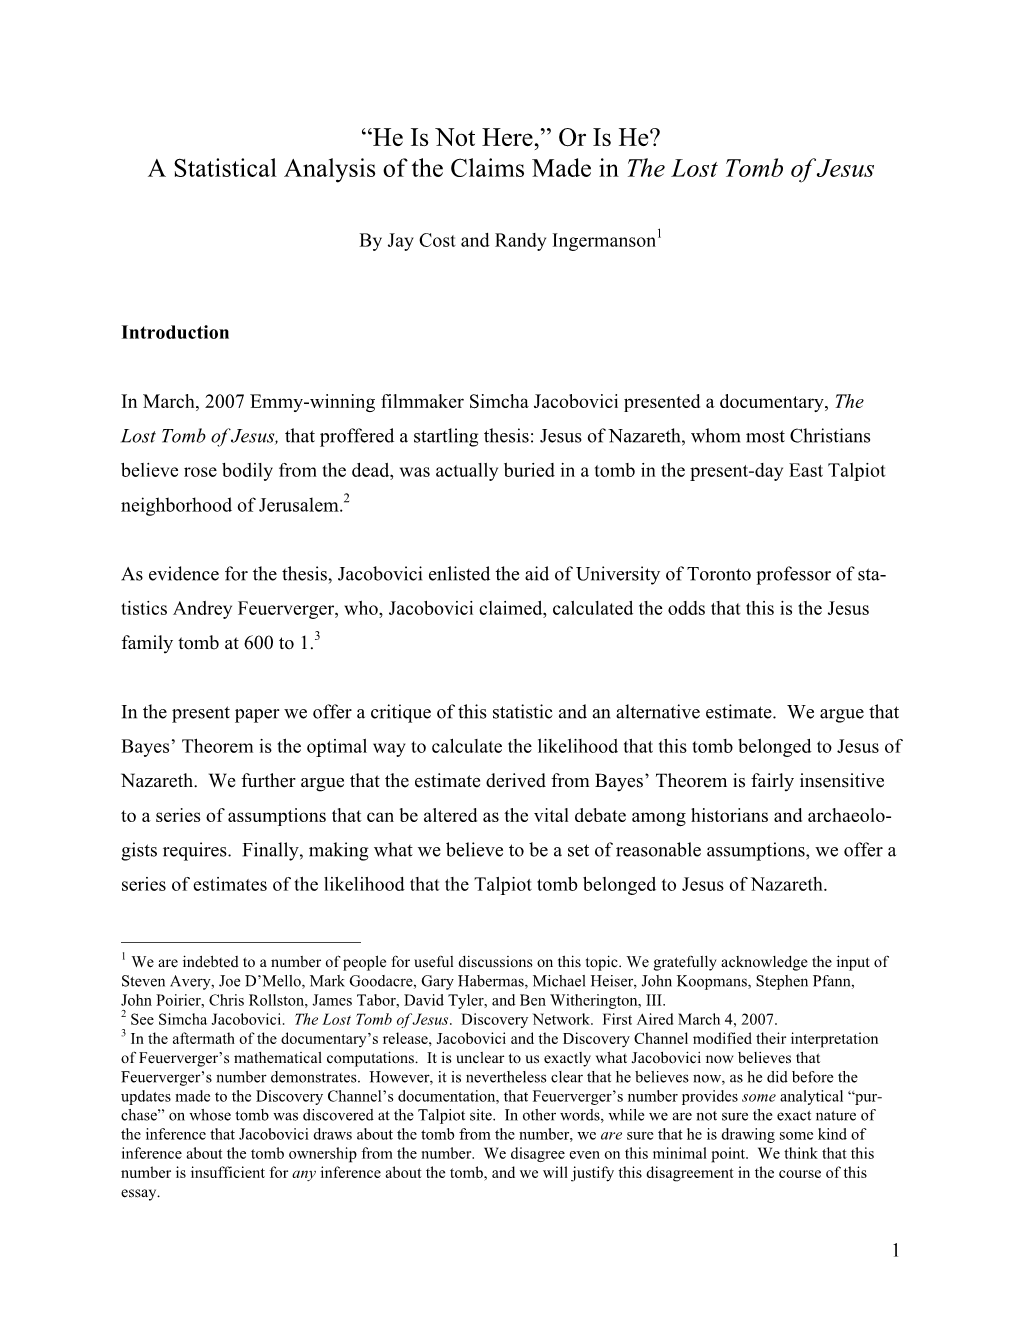 He Is Not Here,” Or Is He? a Statistical Analysis of the Claims Made in the Lost Tomb of Jesus